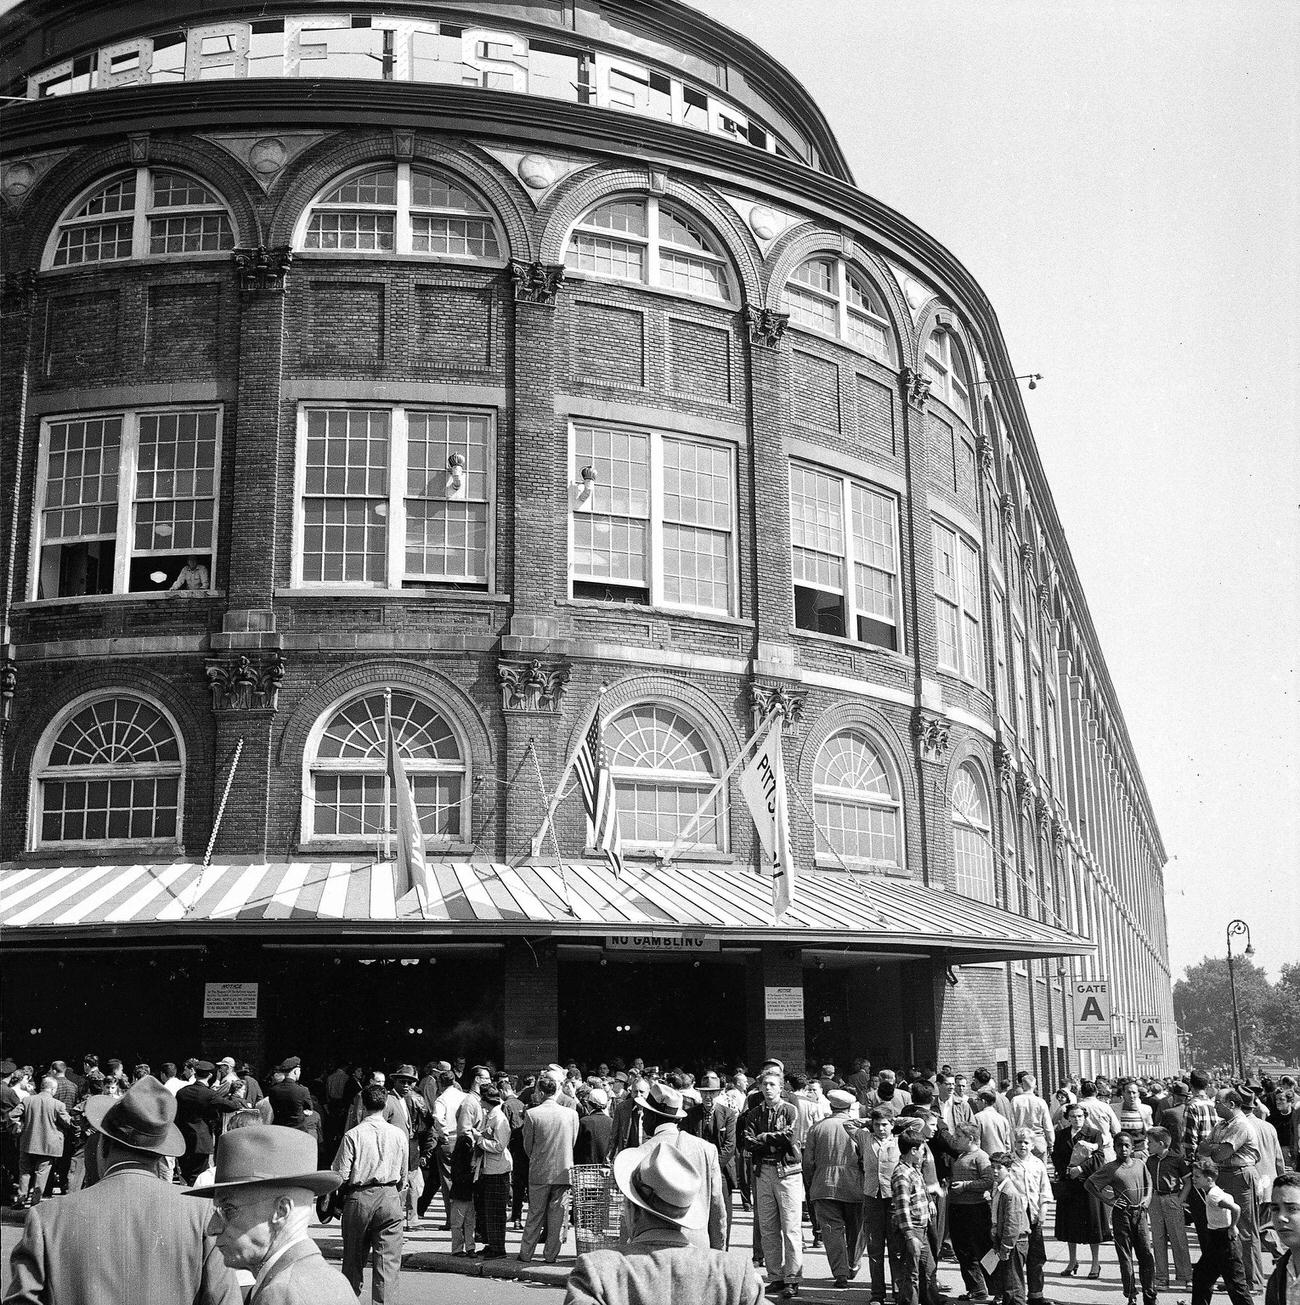 Exterior View Of Ebbets Field Rotunda Before A Game Against Pittsburgh Pirates, Brooklyn, 1956.